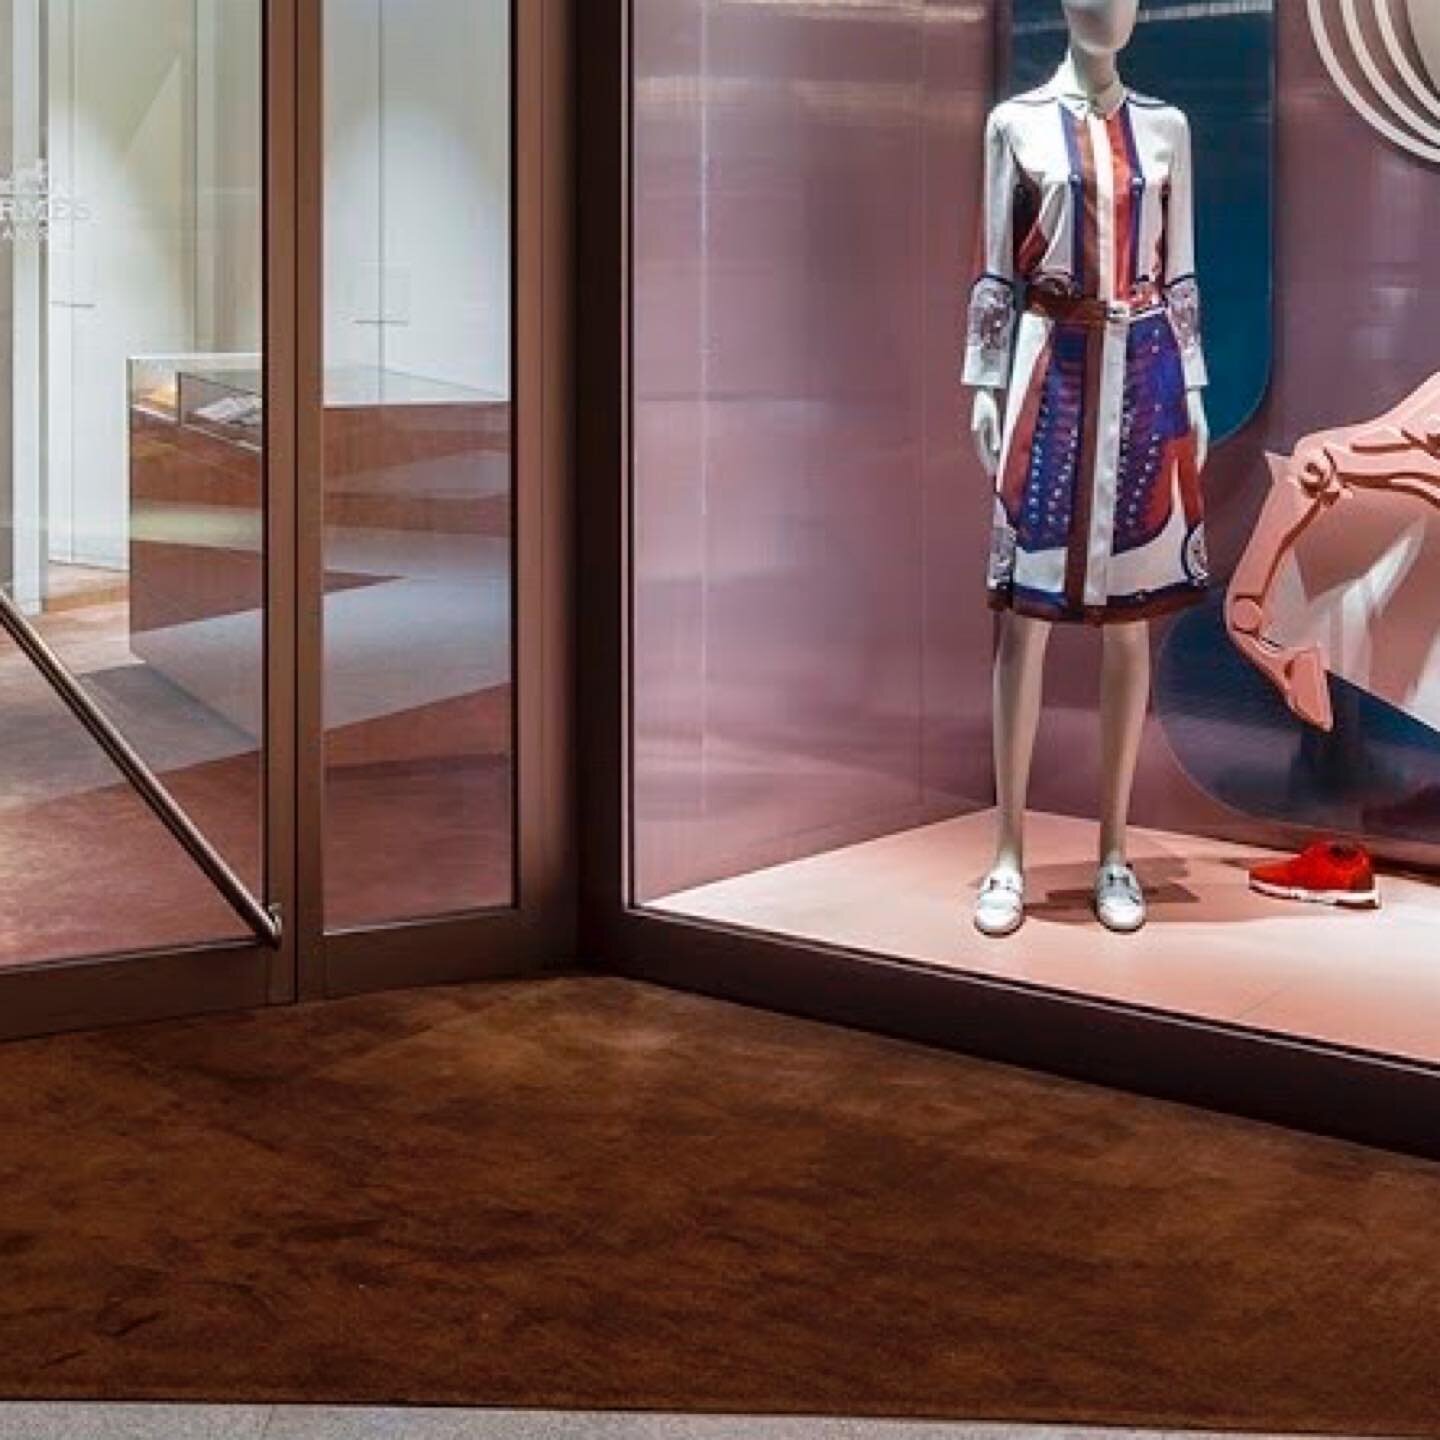 Client/ Herm&egrave;s Taiwan

Project/ 2020 Spring window

Design &amp; Curated/ AMCP Studio

Production/ Hozen Plan 

Photography/ HAN Studio 

Innovation and transformation have been integral to human civilization throughout history. From ancient t